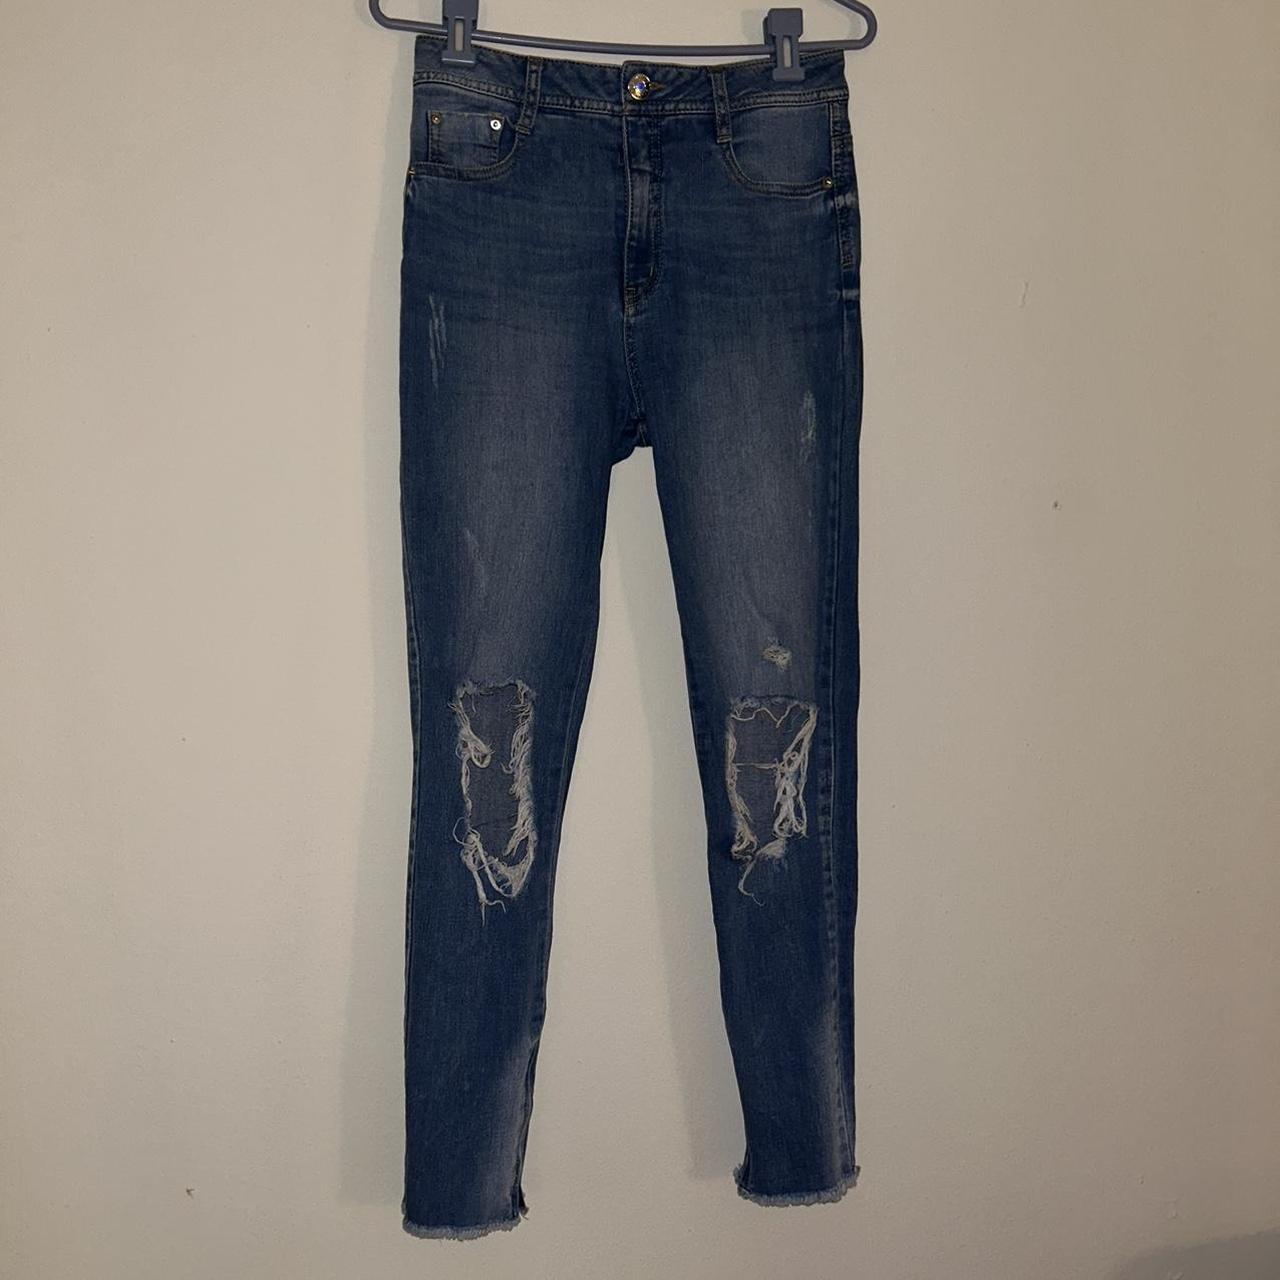 Women's Topshop Ripped & Distressed Jeans